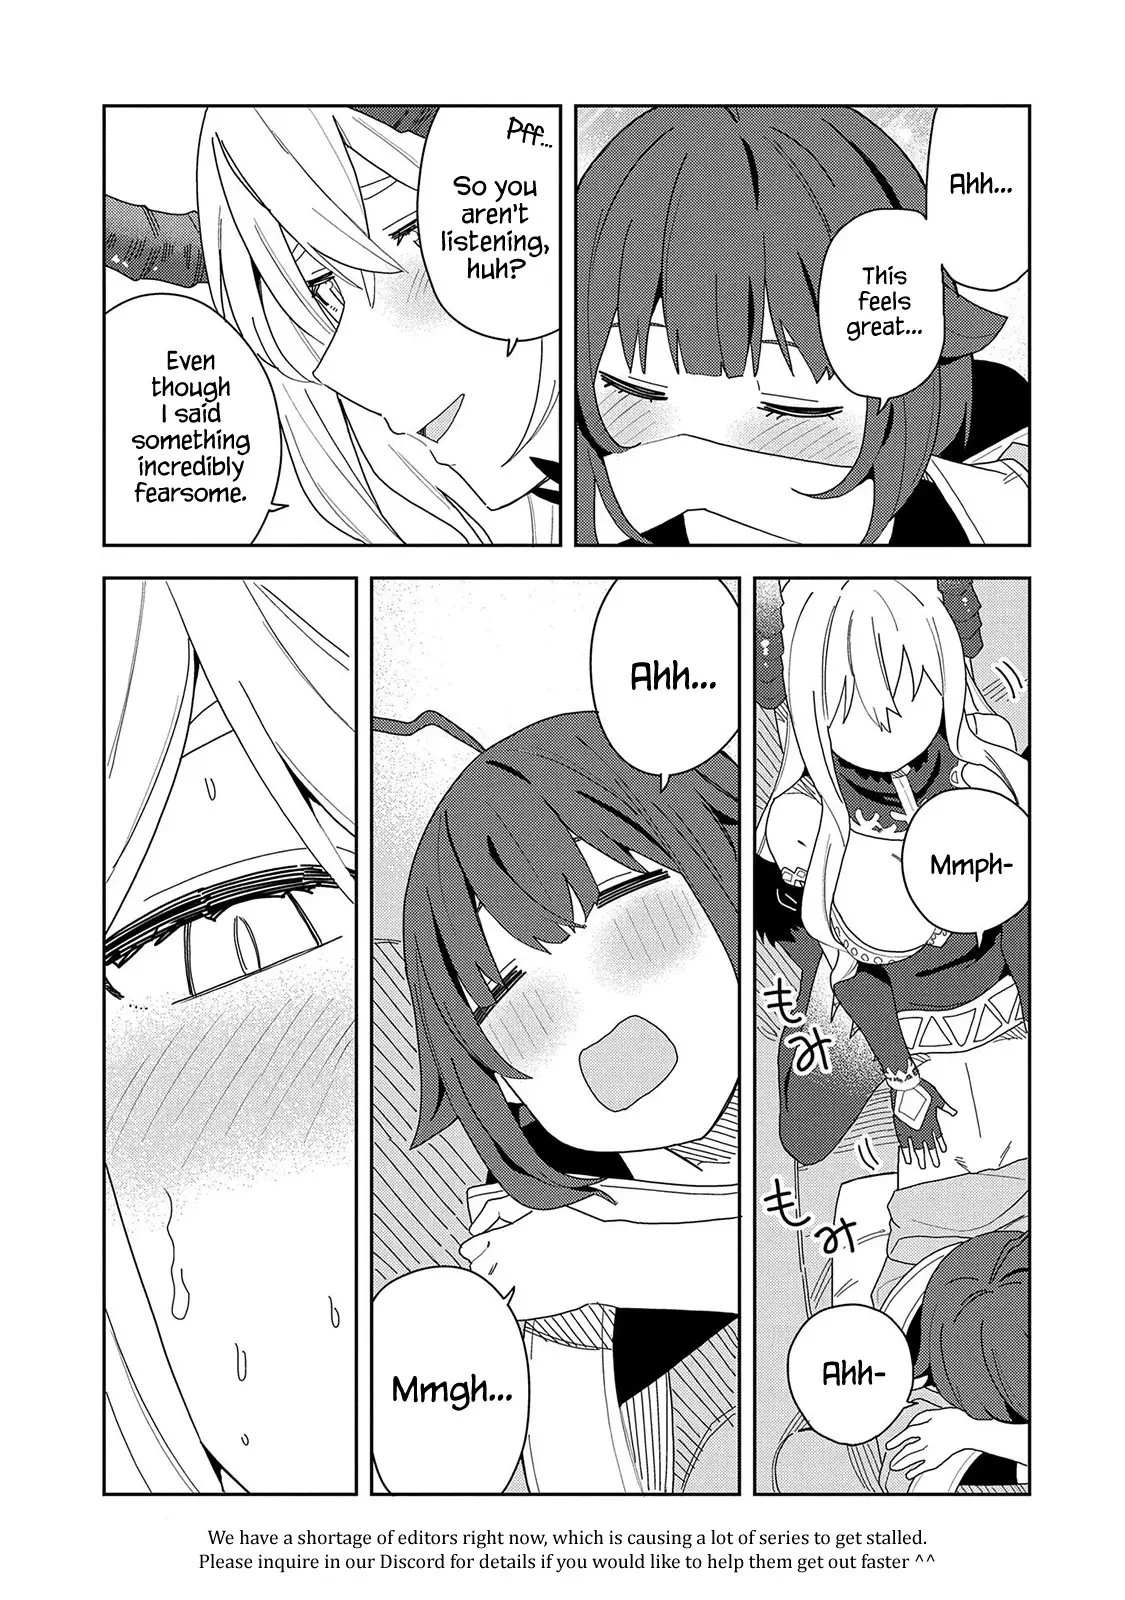 I Summoned The Devil To Grant Me A Wish, But I Married Her Instead Since She Was Adorable ~My New Devil Wife~ - 6 page 5